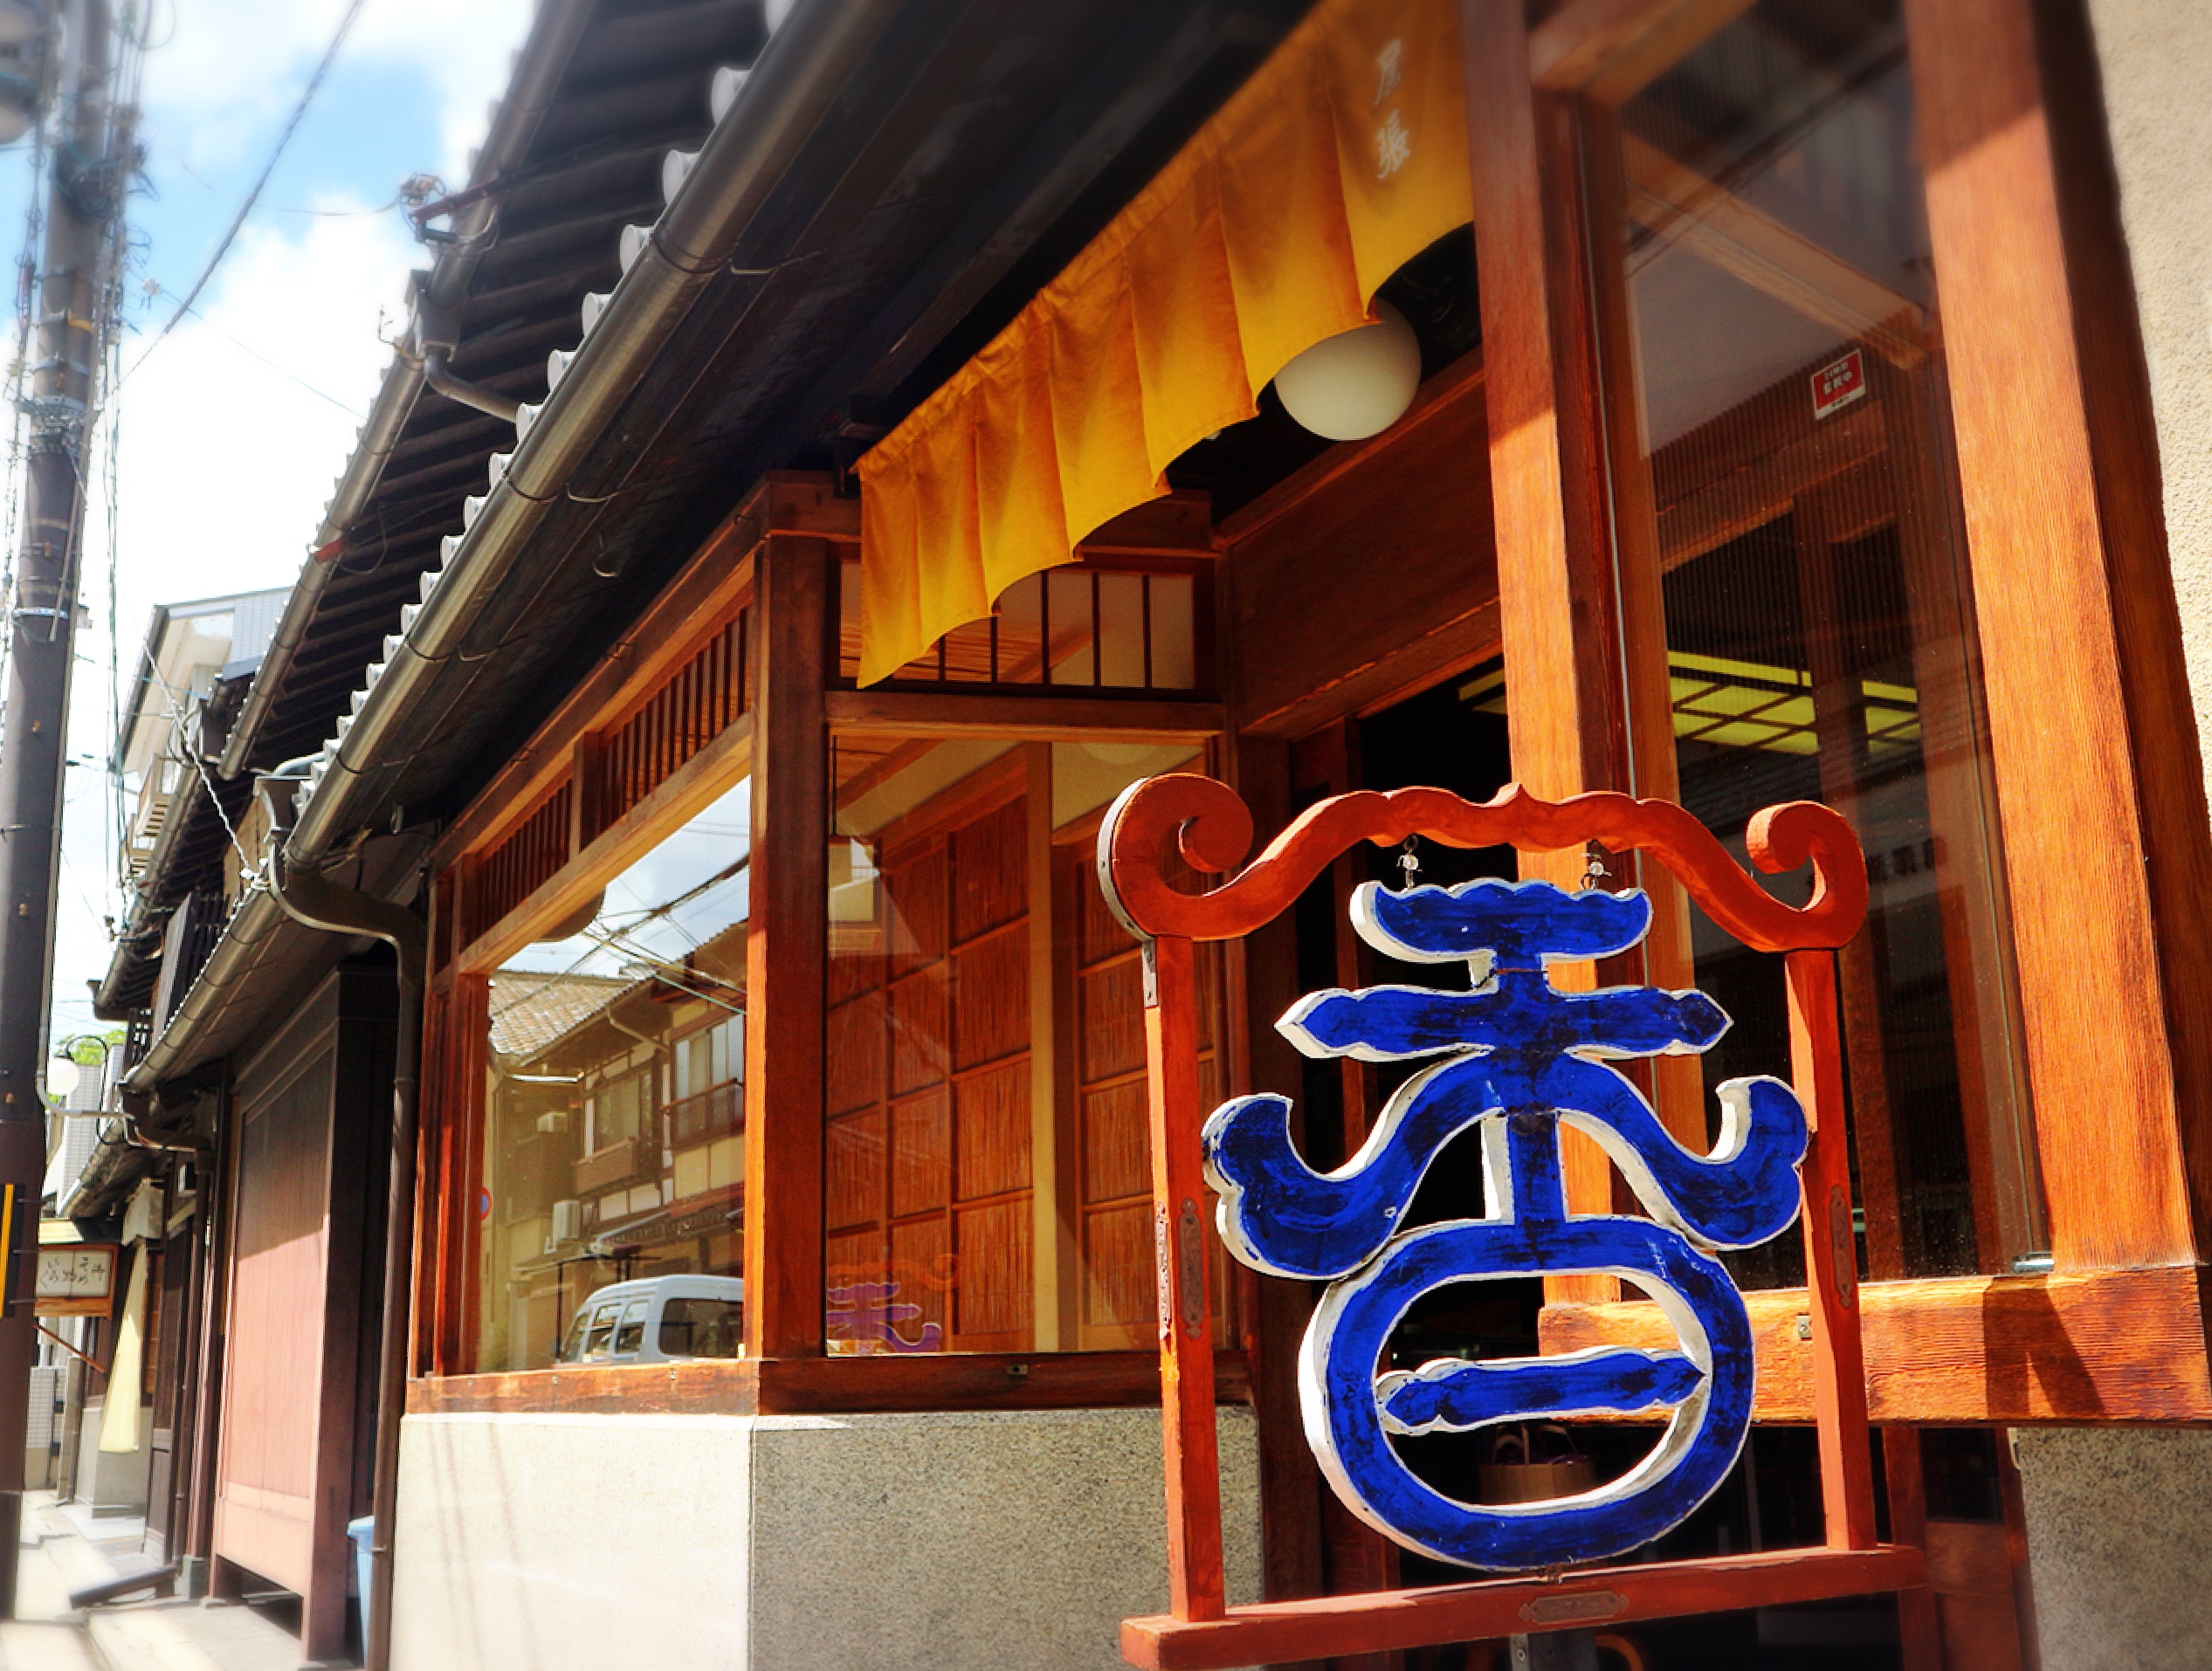 An incense specialty shop with luxurious scent